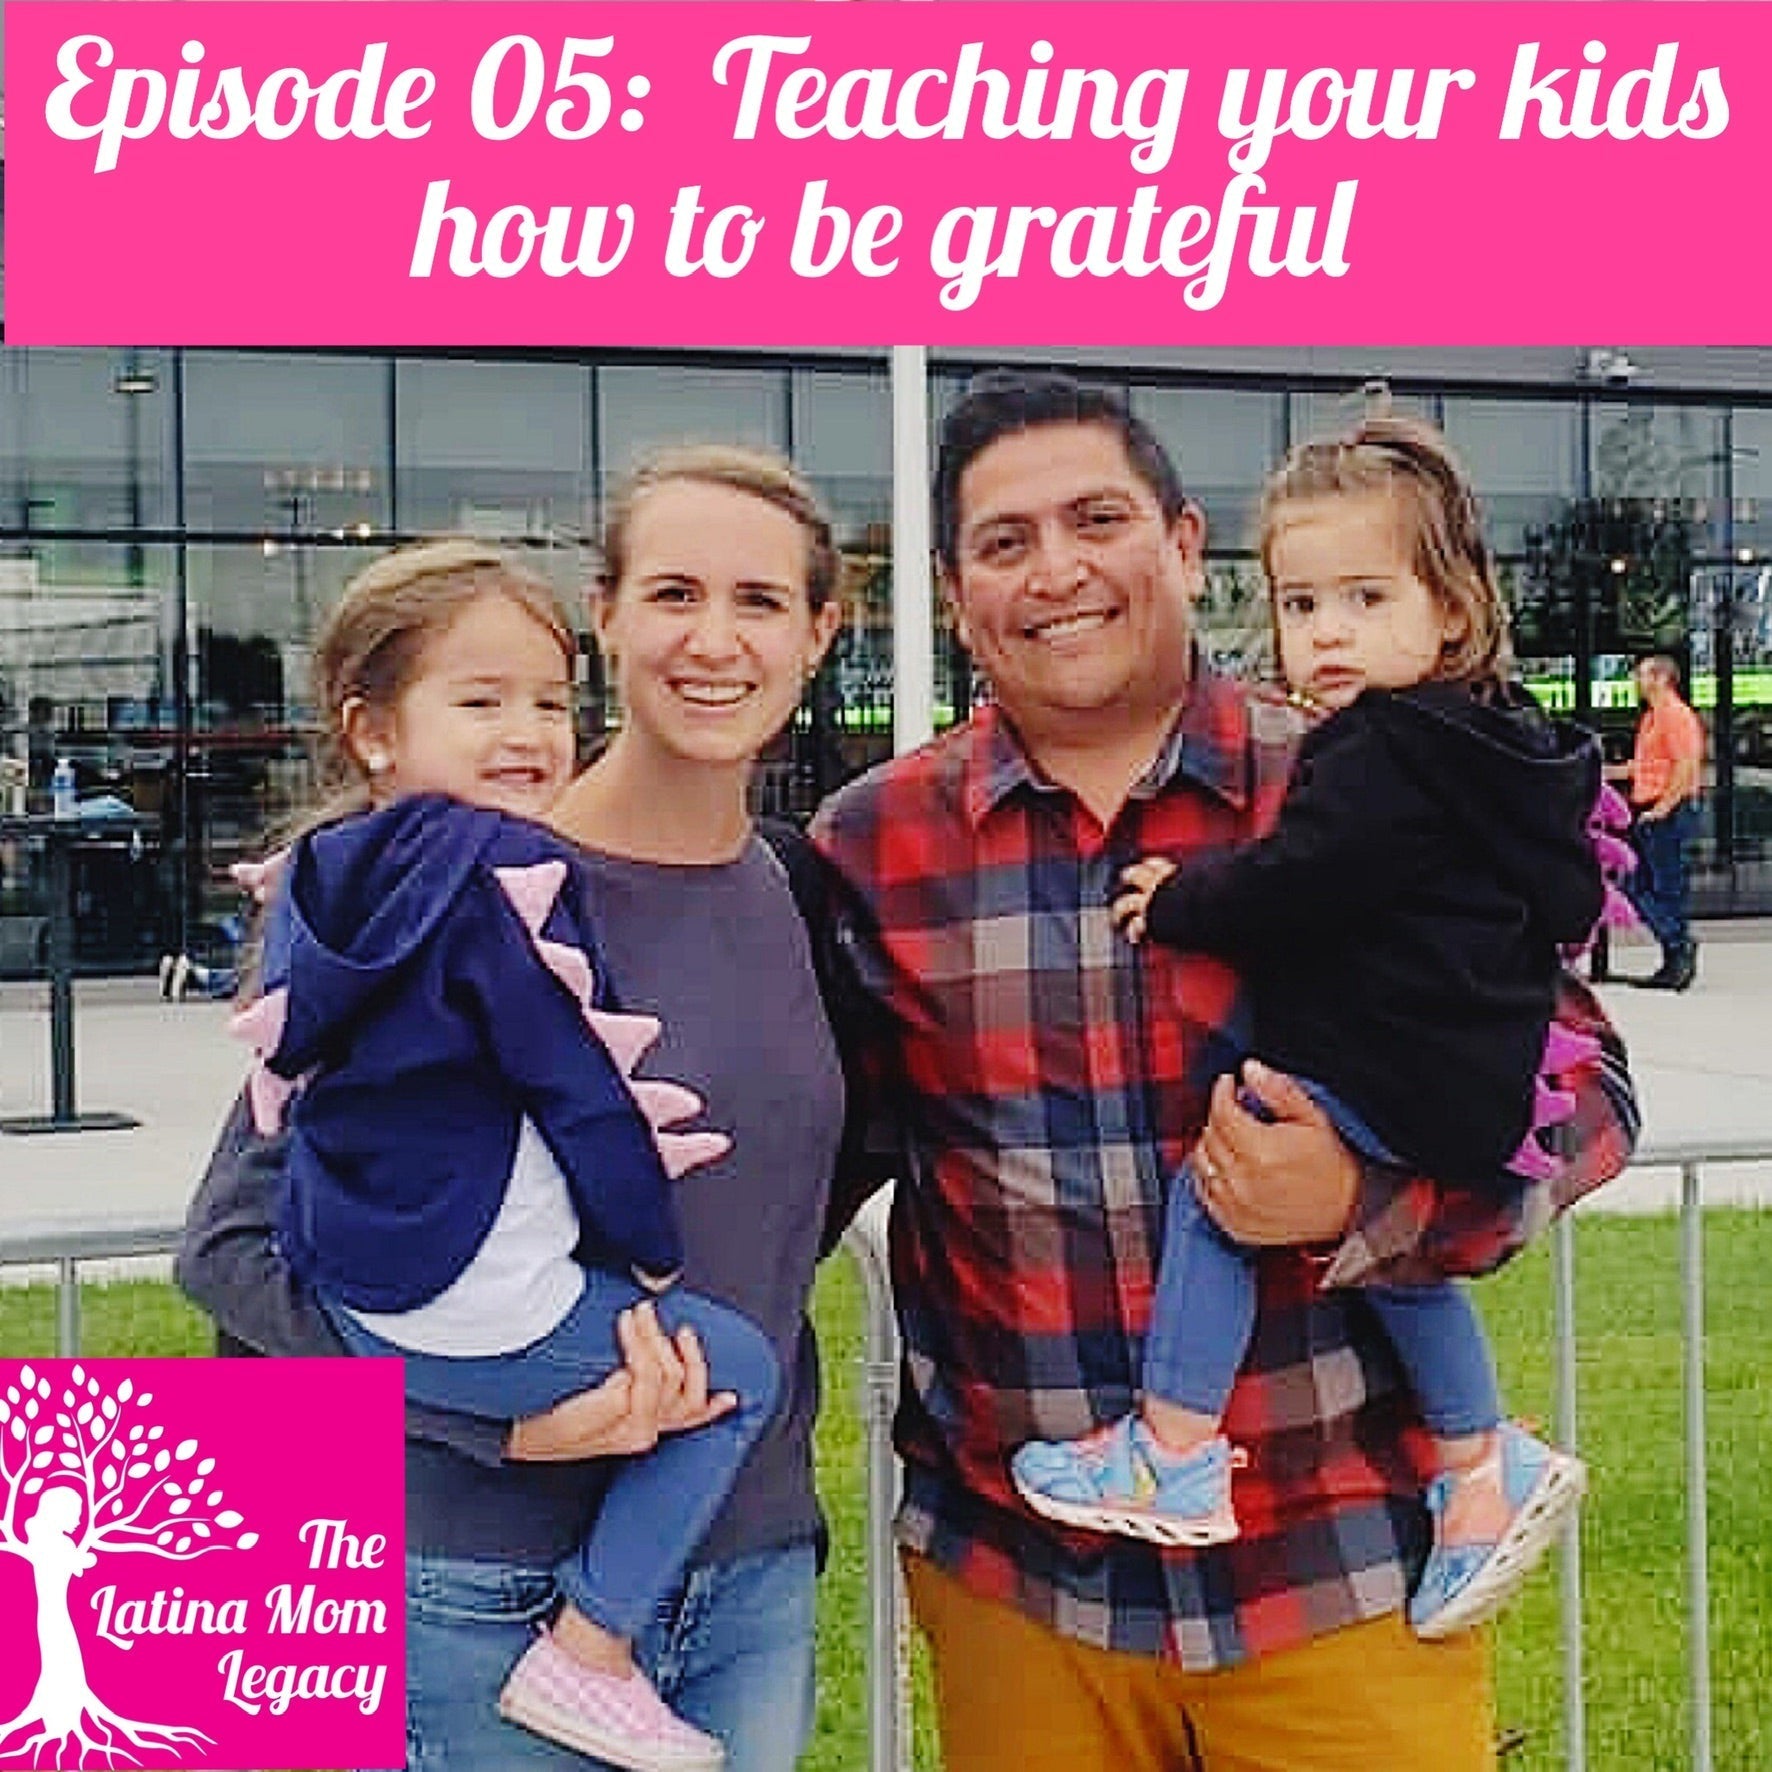 Ep-5 - The Latina Mom Legacy Podcast - Teaching your kids how to be grateful with Kayla Alonso - Mi LegaSi